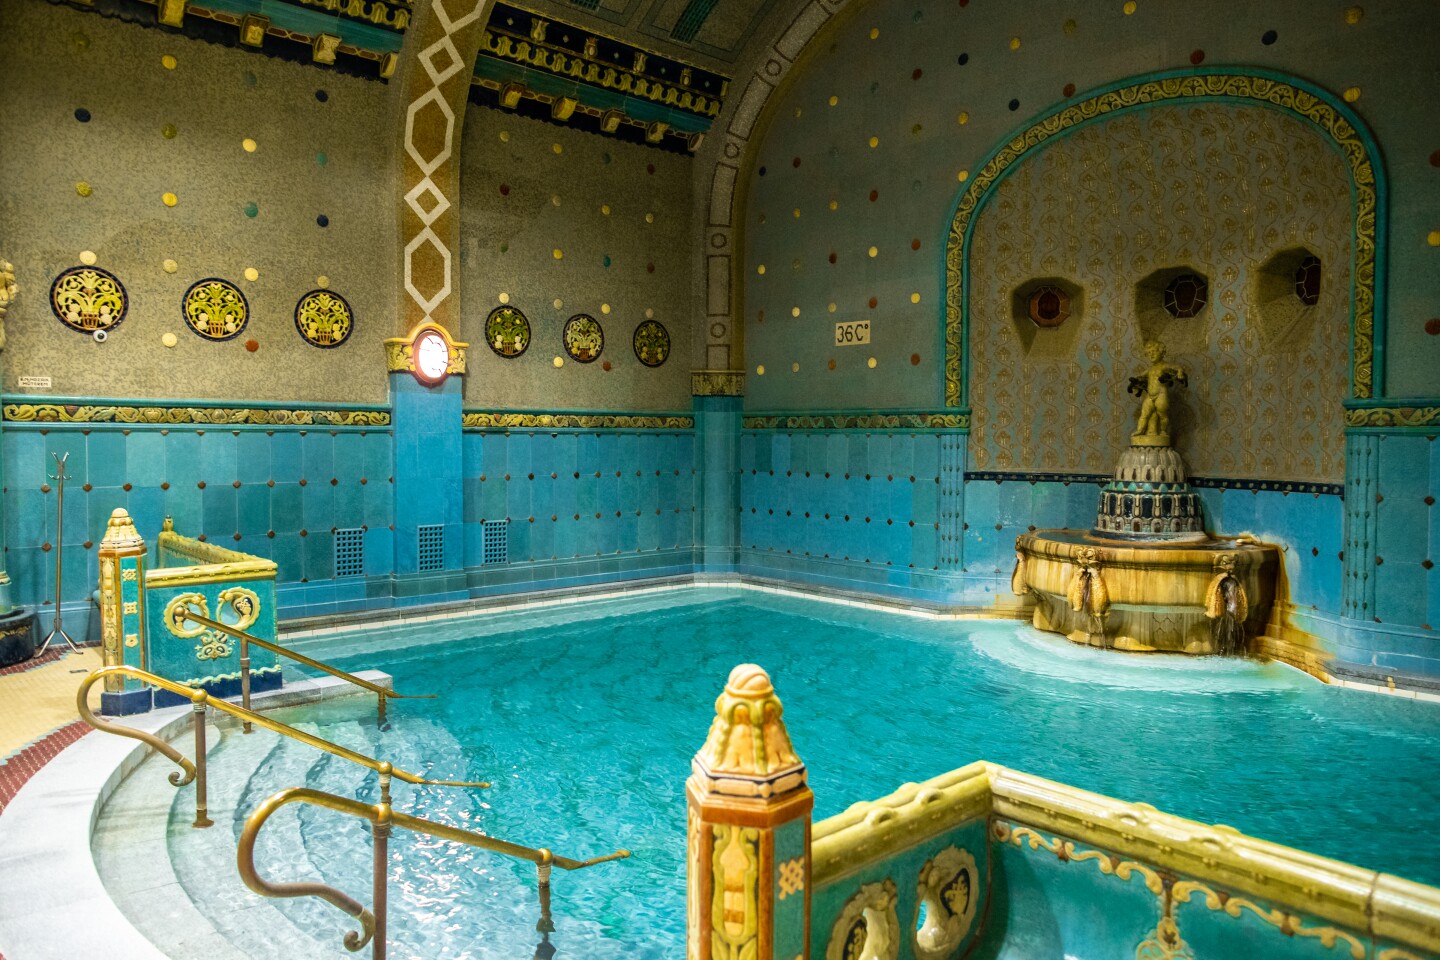 <h2>Our favorite thermal bathhouses in Budapest</h2> <p>Some of our <a class="Link" href="https://www.afar.com/magazine/the-ultimate-guide-to-budapests-historic-thermal-baths-and-spas" rel="noopener">favorite baths in Budapest</a> to visit include:</p> <ul>   <li><a class="Link" href="https://www.gellertbath.hu/" rel="noopener">Gellért Baths</a>: Built in 1918 as part of the stately Hotel Gellért, this is a fine example of Budapest’s early 20th-century bathing culture.</li>   <li><a class="Link" href="https://szechenyibath.com/" rel="noopener">Széchenyi Thermal Bath</a>: Budapest’s most popular thermal bath among locals and tourists alike, it’s also the largest spa complex in Hungary. It has multiple outdoor baths as well.</li>   <li><a class="Link" href="https://en.rudasfurdo.hu/" rel="noopener">Rudas Thermal Bath</a>: Located at the Buda end of Erzsébet Bridge, this bathhouse has been welcoming bathers for upwards of 450 years. A rooftop pool has some of the best views of the city.</li>   <li><a class="Link" href="https://www.budapestbylocals.com/veli-bej-bath/" rel="noopener">Veli Bej</a>: This bathhouse was built in the 16th century but recently renovated.</li>   <li><a class="Link" href="https://en.lukacsfurdo.hu/" rel="noopener">Szent Lukács Bath</a>: Known for the healing properties of its waters, this bathhouse also has specialty treatments, such as the Weight Bath used for stretching the back and spinal injuries. </li>  </ul> <p><i>This article originally appeared online in 2019; it was most recently updated on March 14, 2024, to include current information.</i></p>